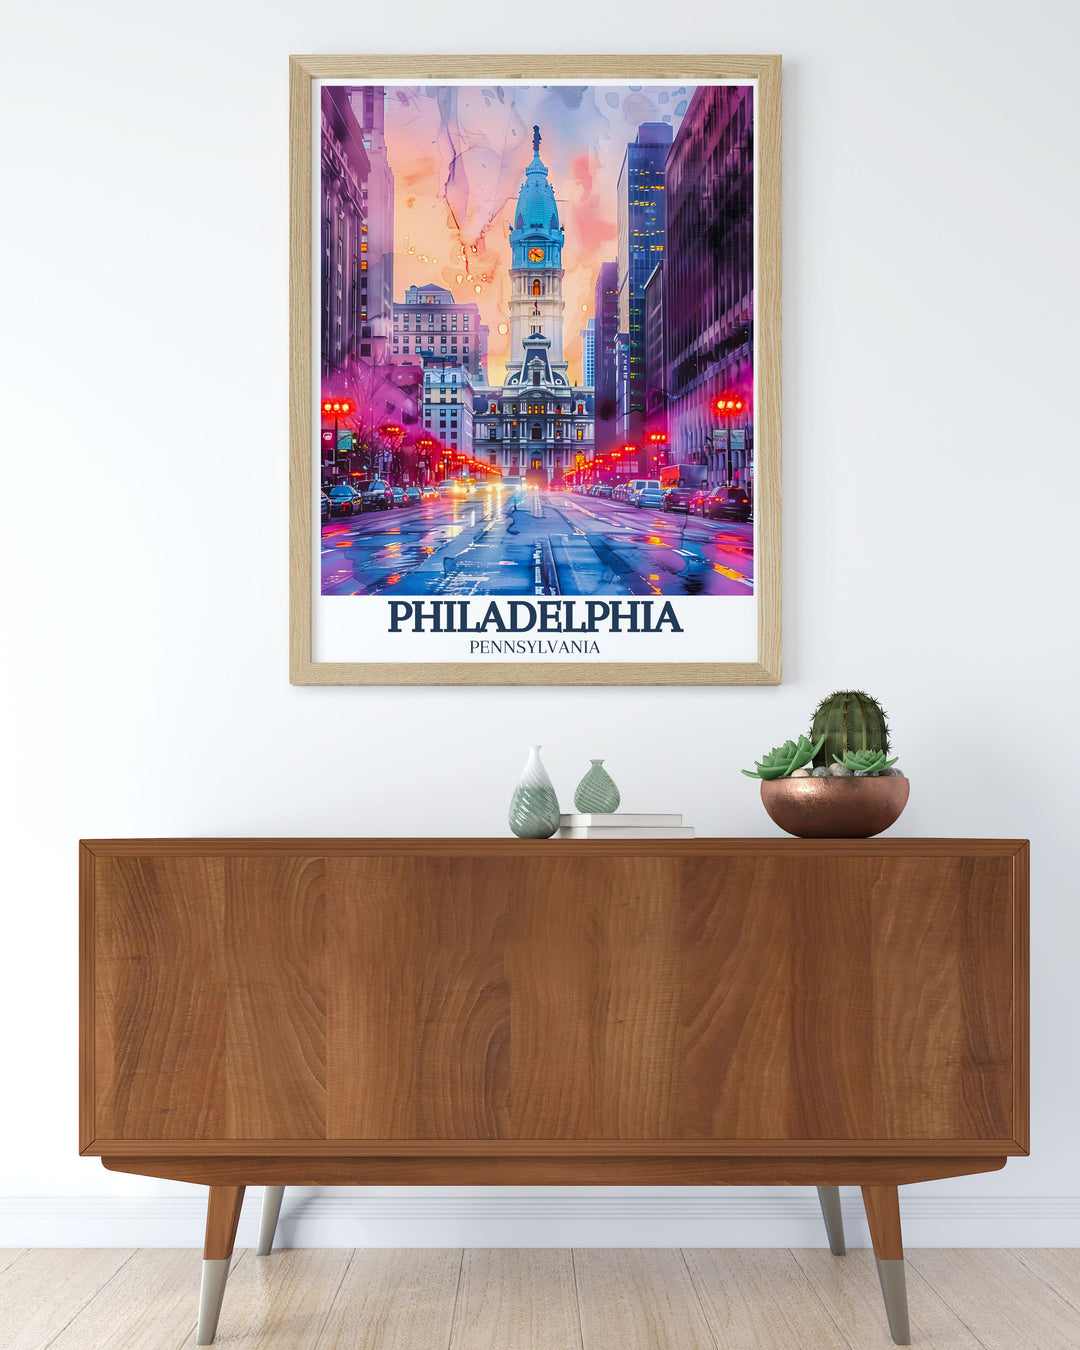 Stunning Philadelphia photo showcasing Independence National Historical Park Franklin Institute and City Hall a great addition to any Pennsylvania artwork collection highlighting the city's rich heritage